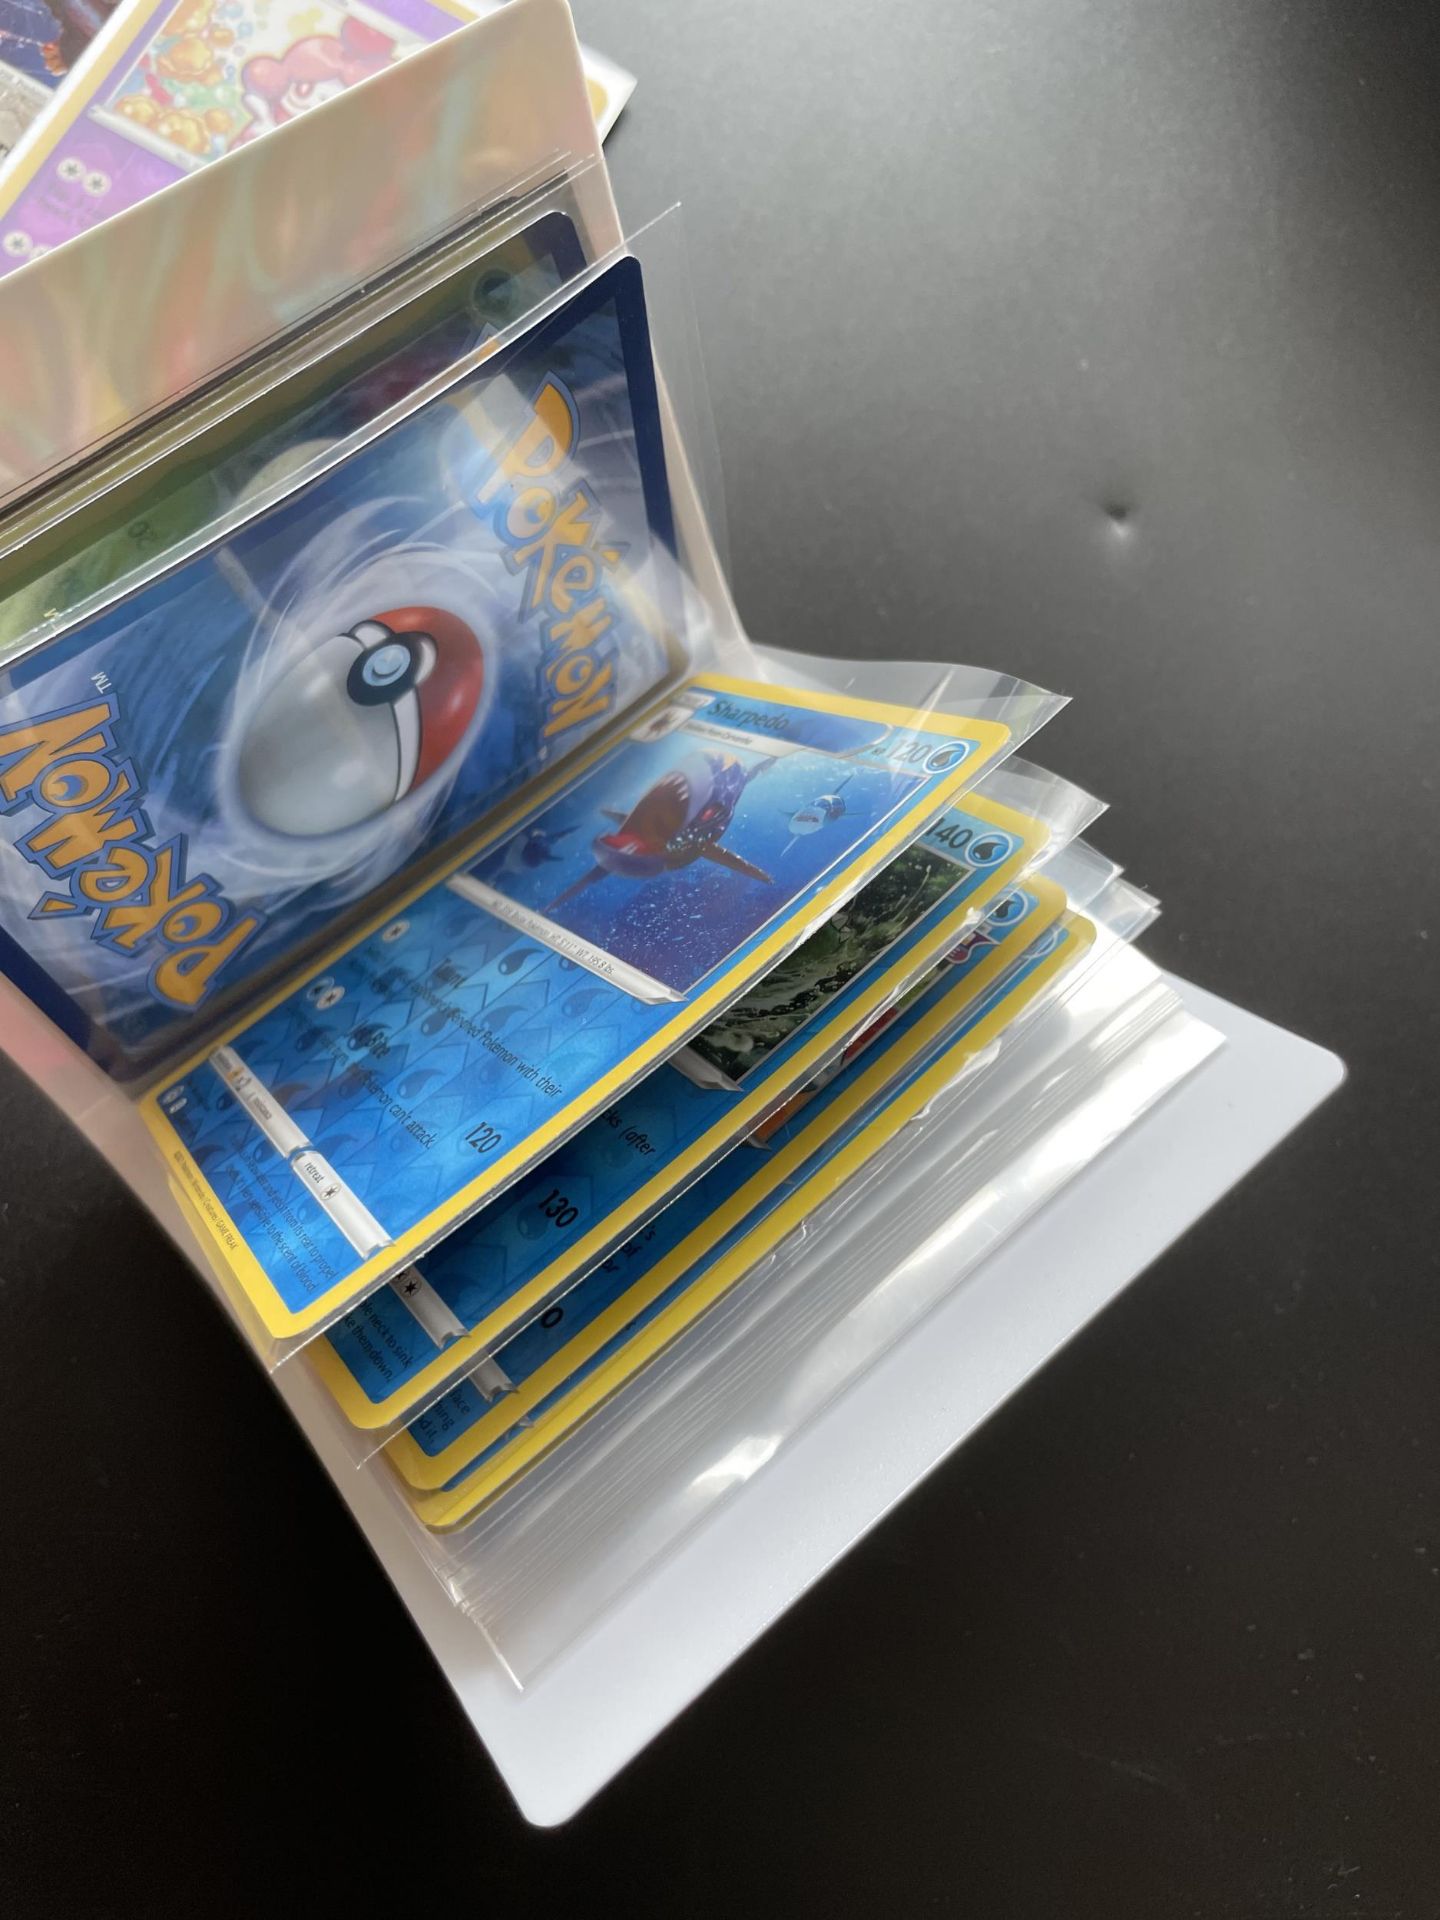 TWO TINS OF ASSORTED POKEMON CARDS, HOLOS, SMALL FOLDER OF CARDS ERC - Image 8 of 8